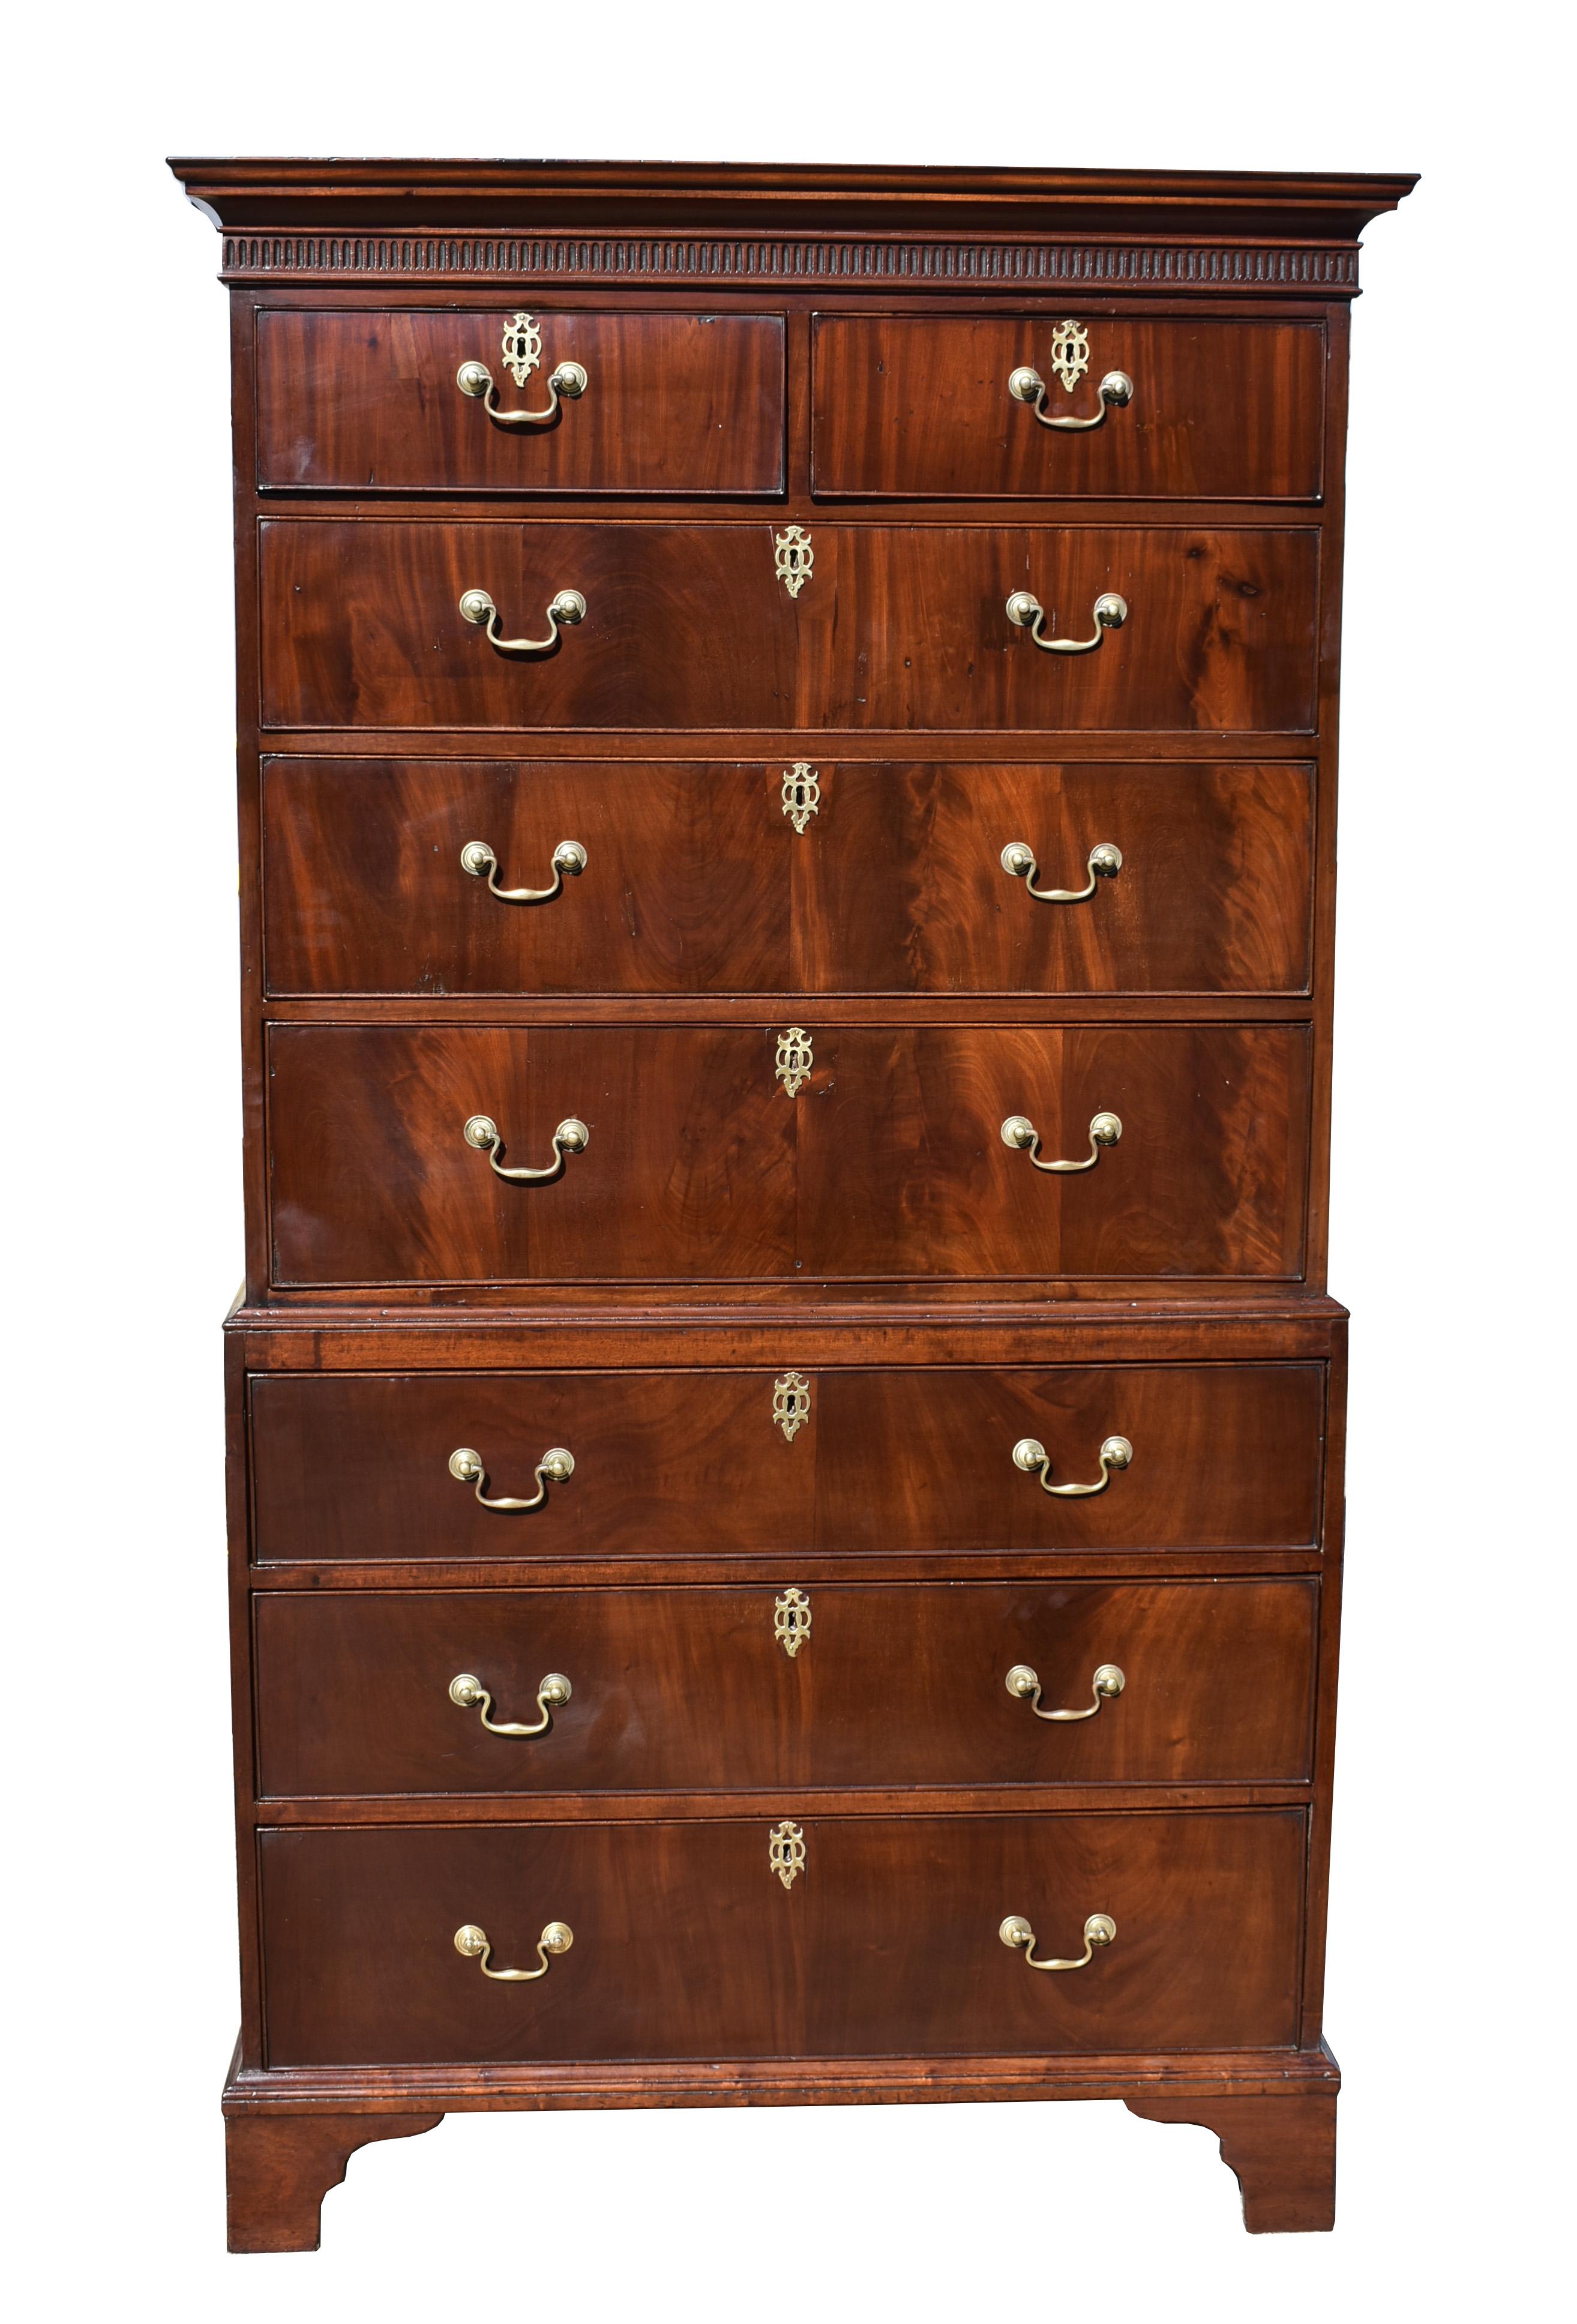 For sale is a good quality George III mahogany chest on chest. The top having two short drawers over three long drawers, each having brass handles and escutcheons. The bottom section has a further three drawers and stands on bracket feet. There are